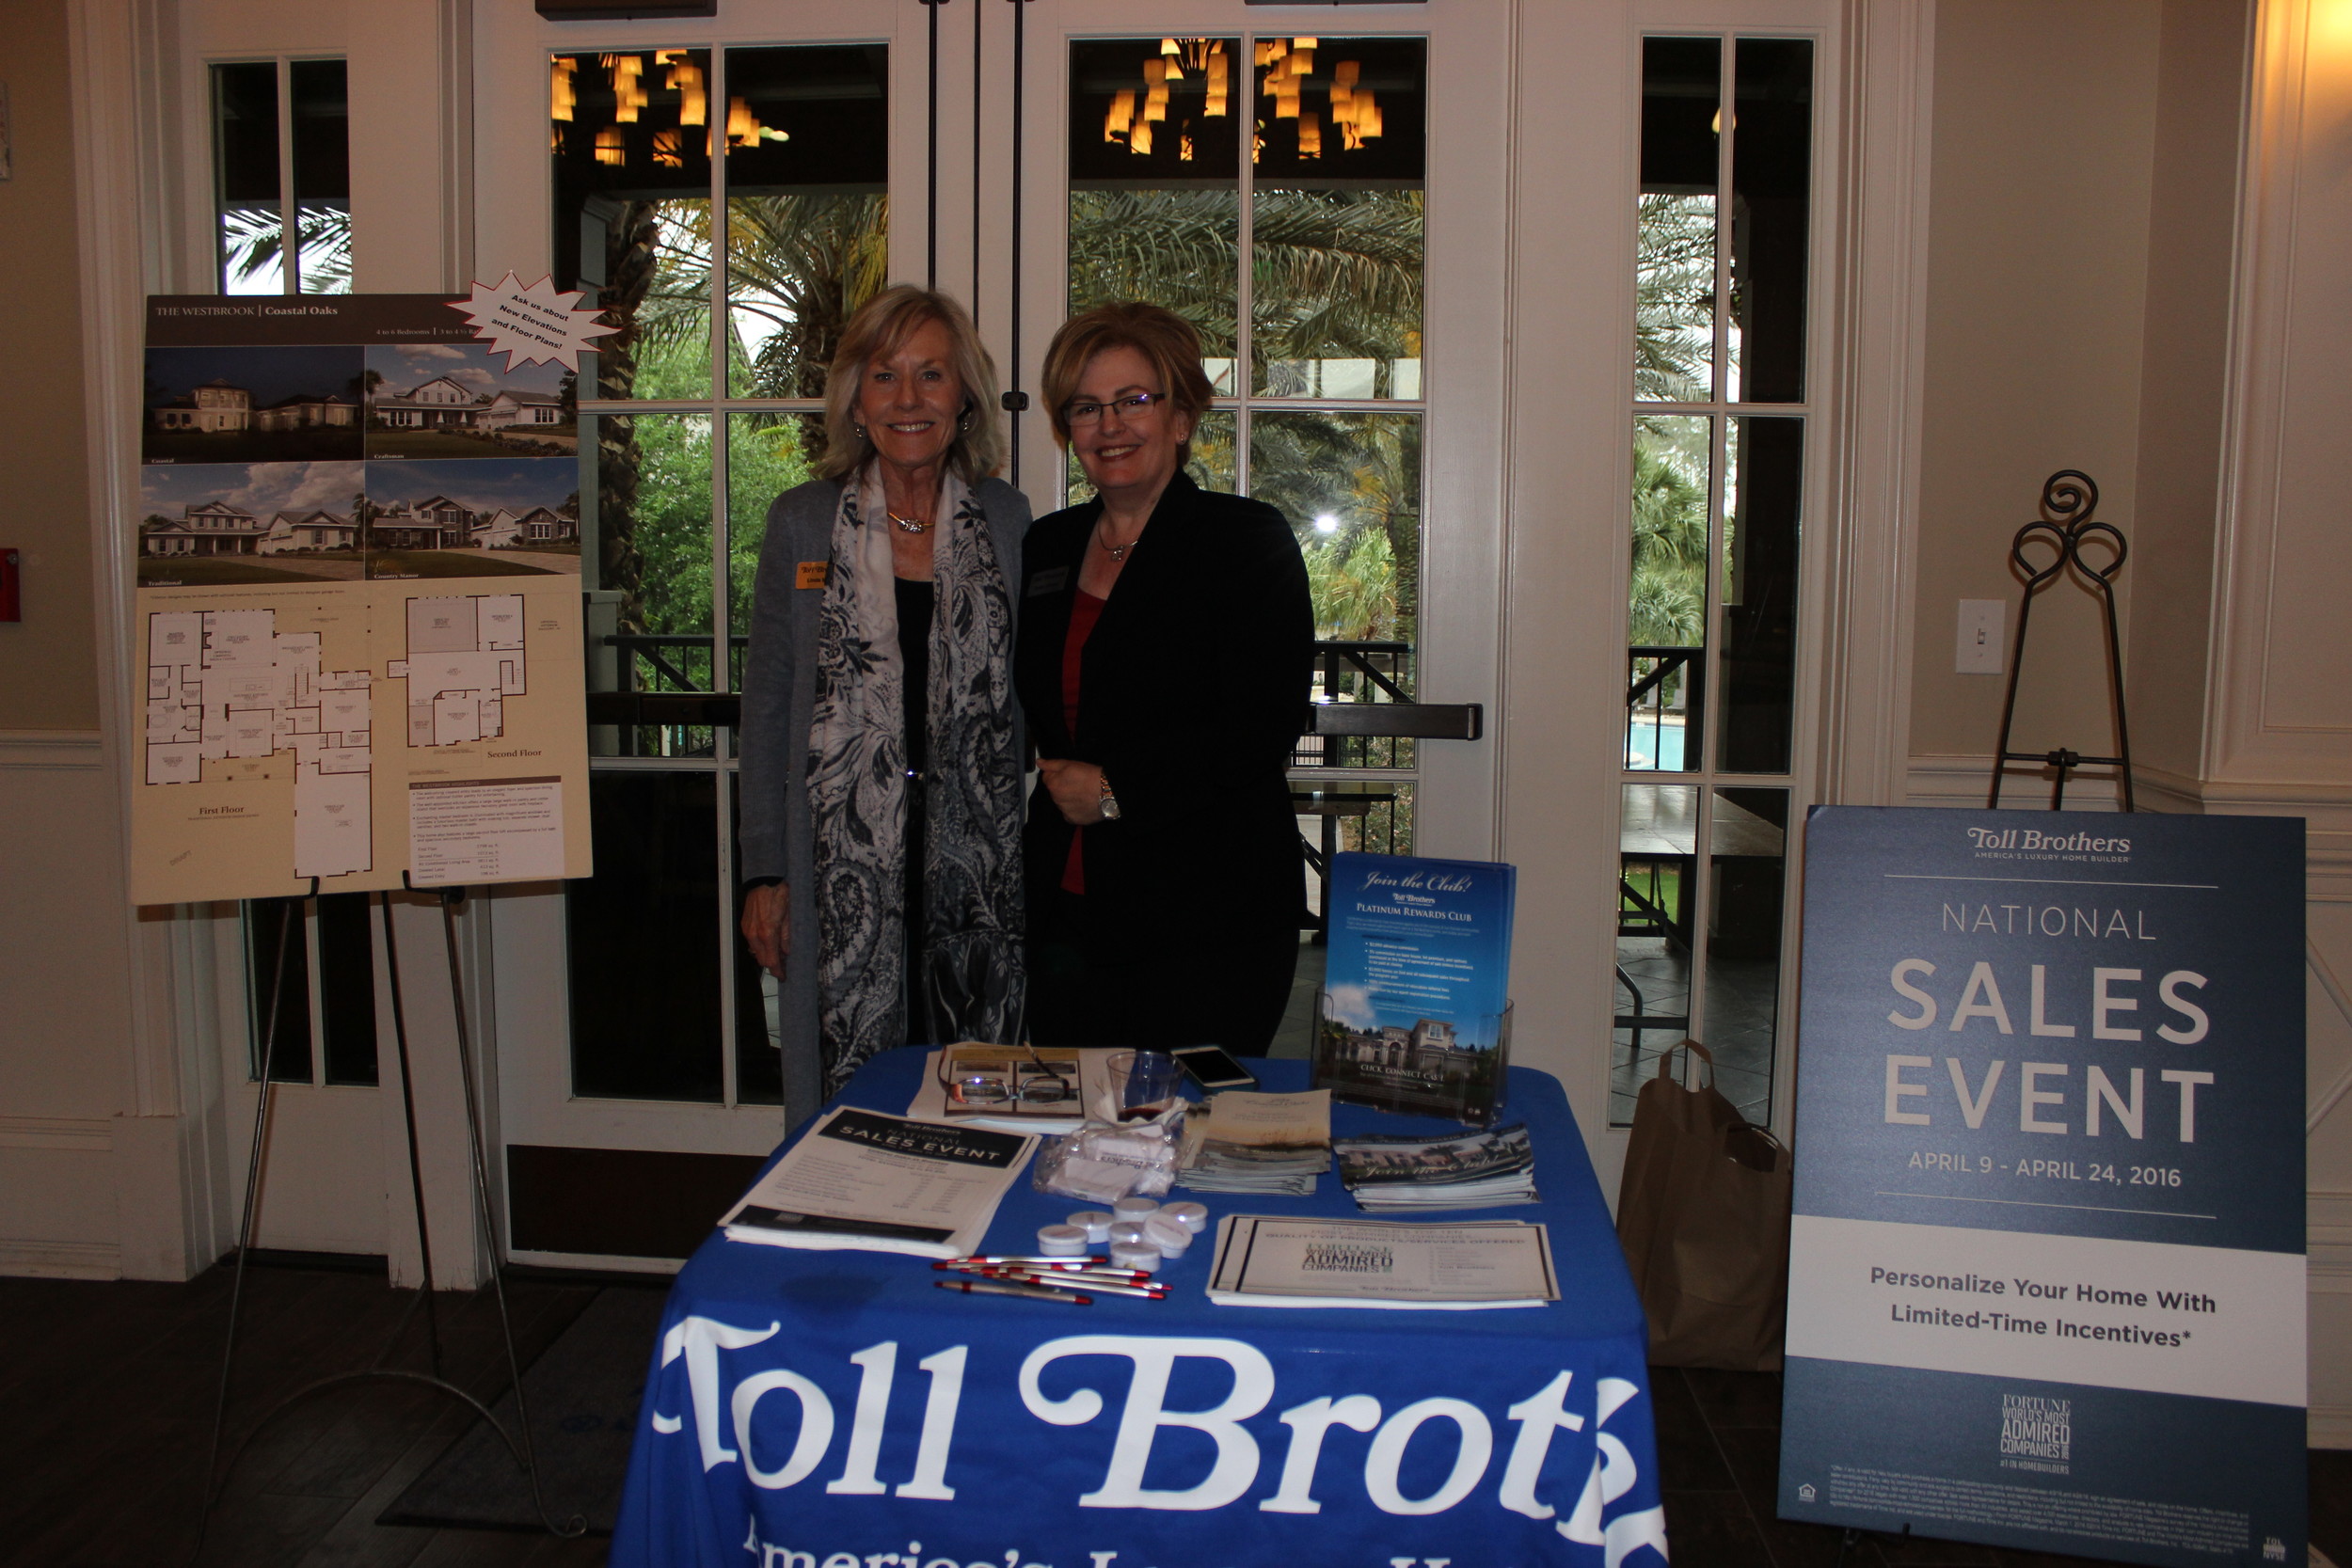 Linda Moore and Susan Krause of Toll Brothers